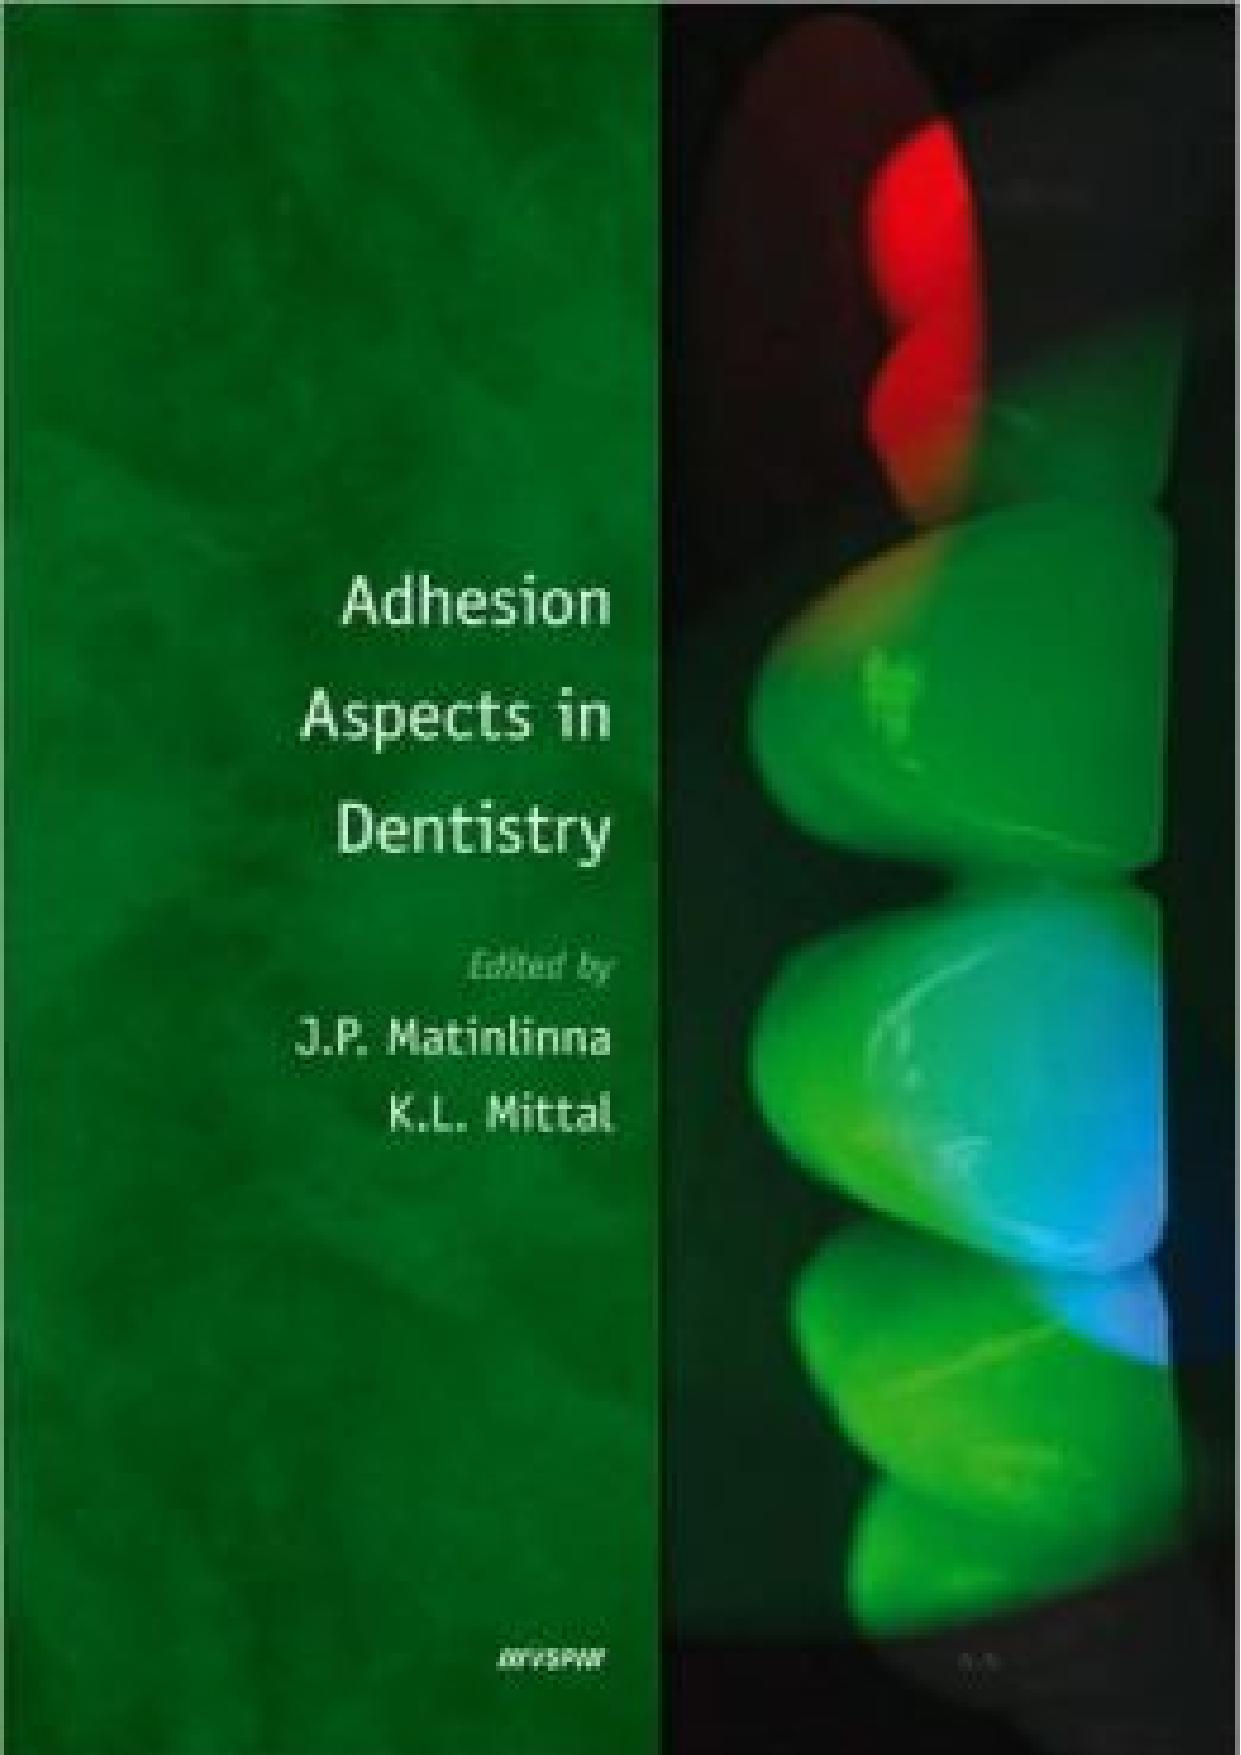 Adhesion Aspects in Dentistry - work1.jpg